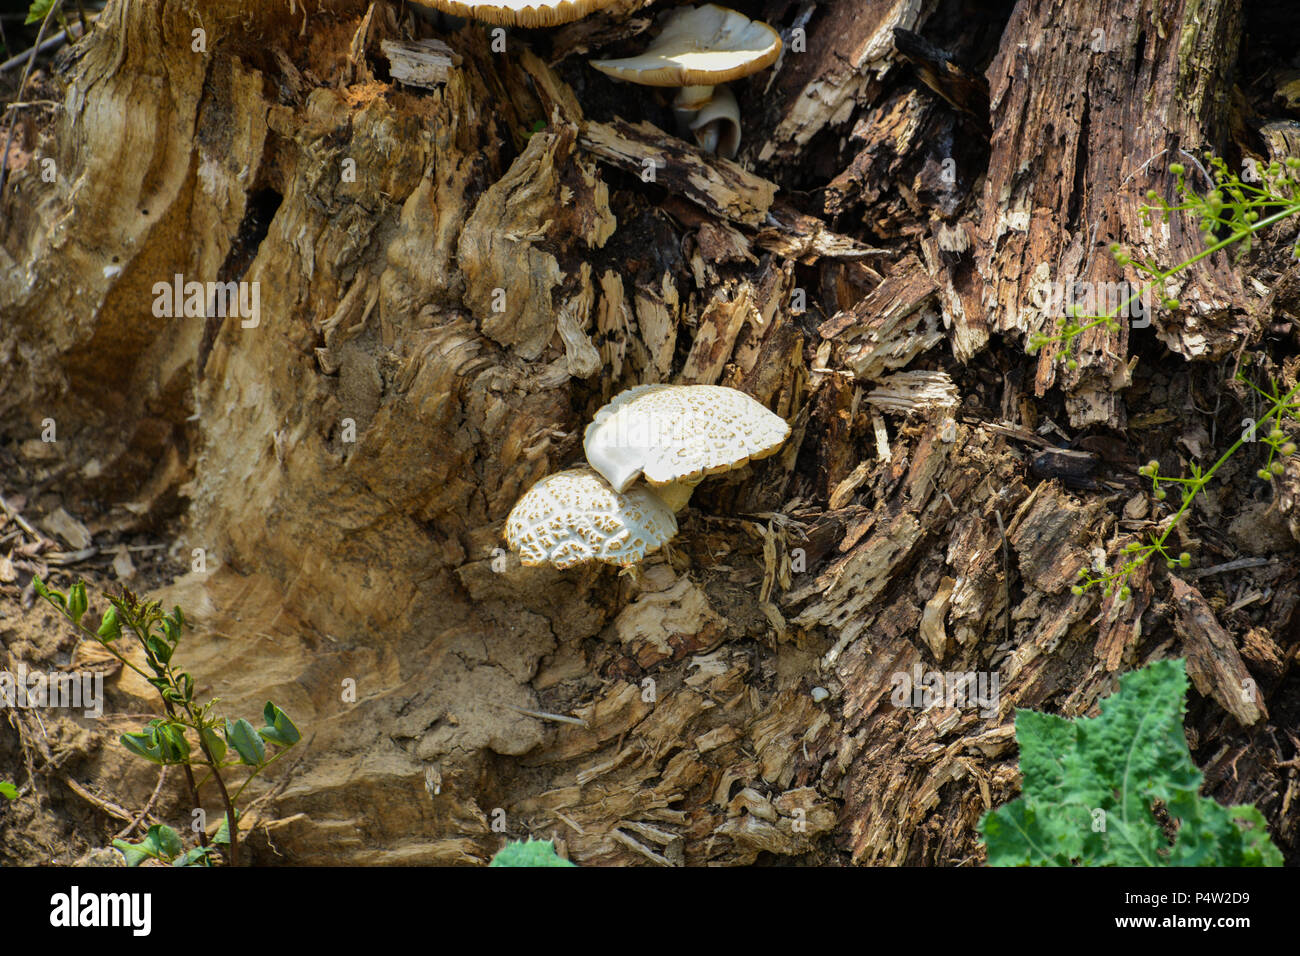 Green, brown and white mushroom on the old wooden log. Group of Mushrooms growing in the Autumn Forest near old log. Mushroom photo, forest photo. Gro Stock Photo